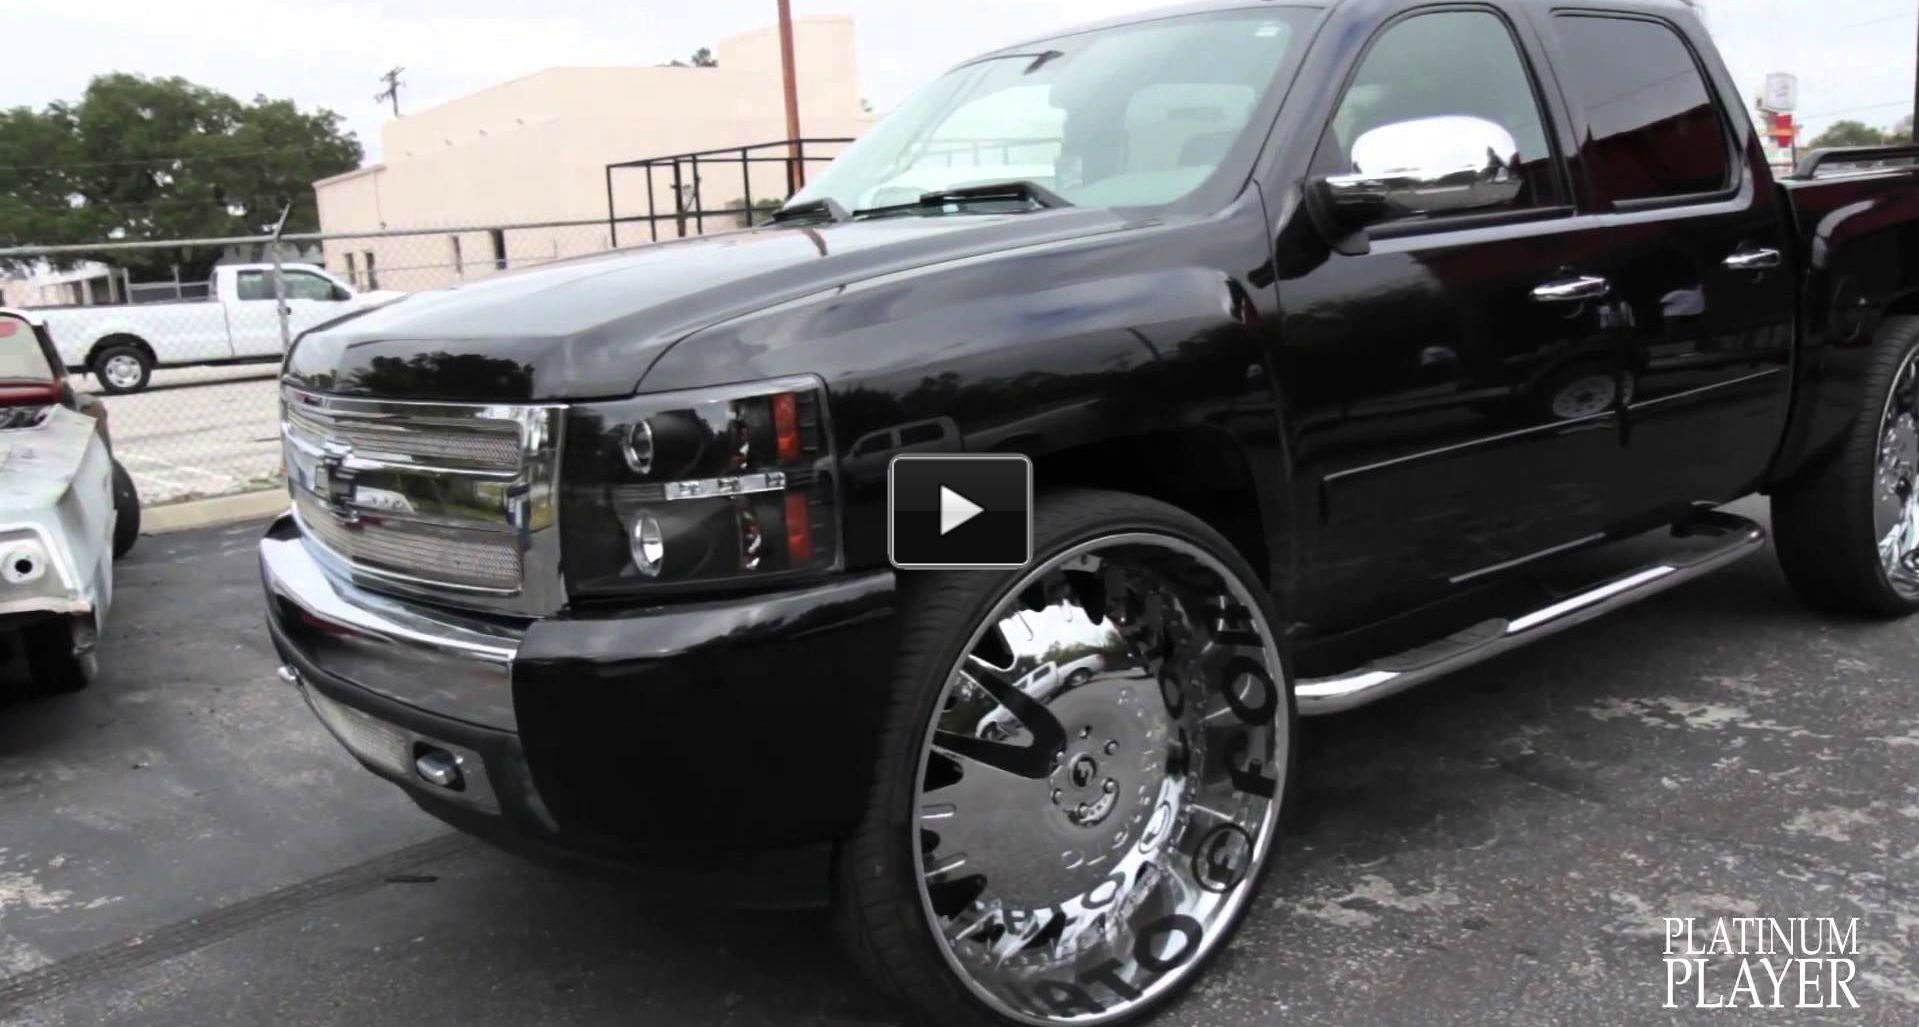 Pimped Chevy Truck on huge rims